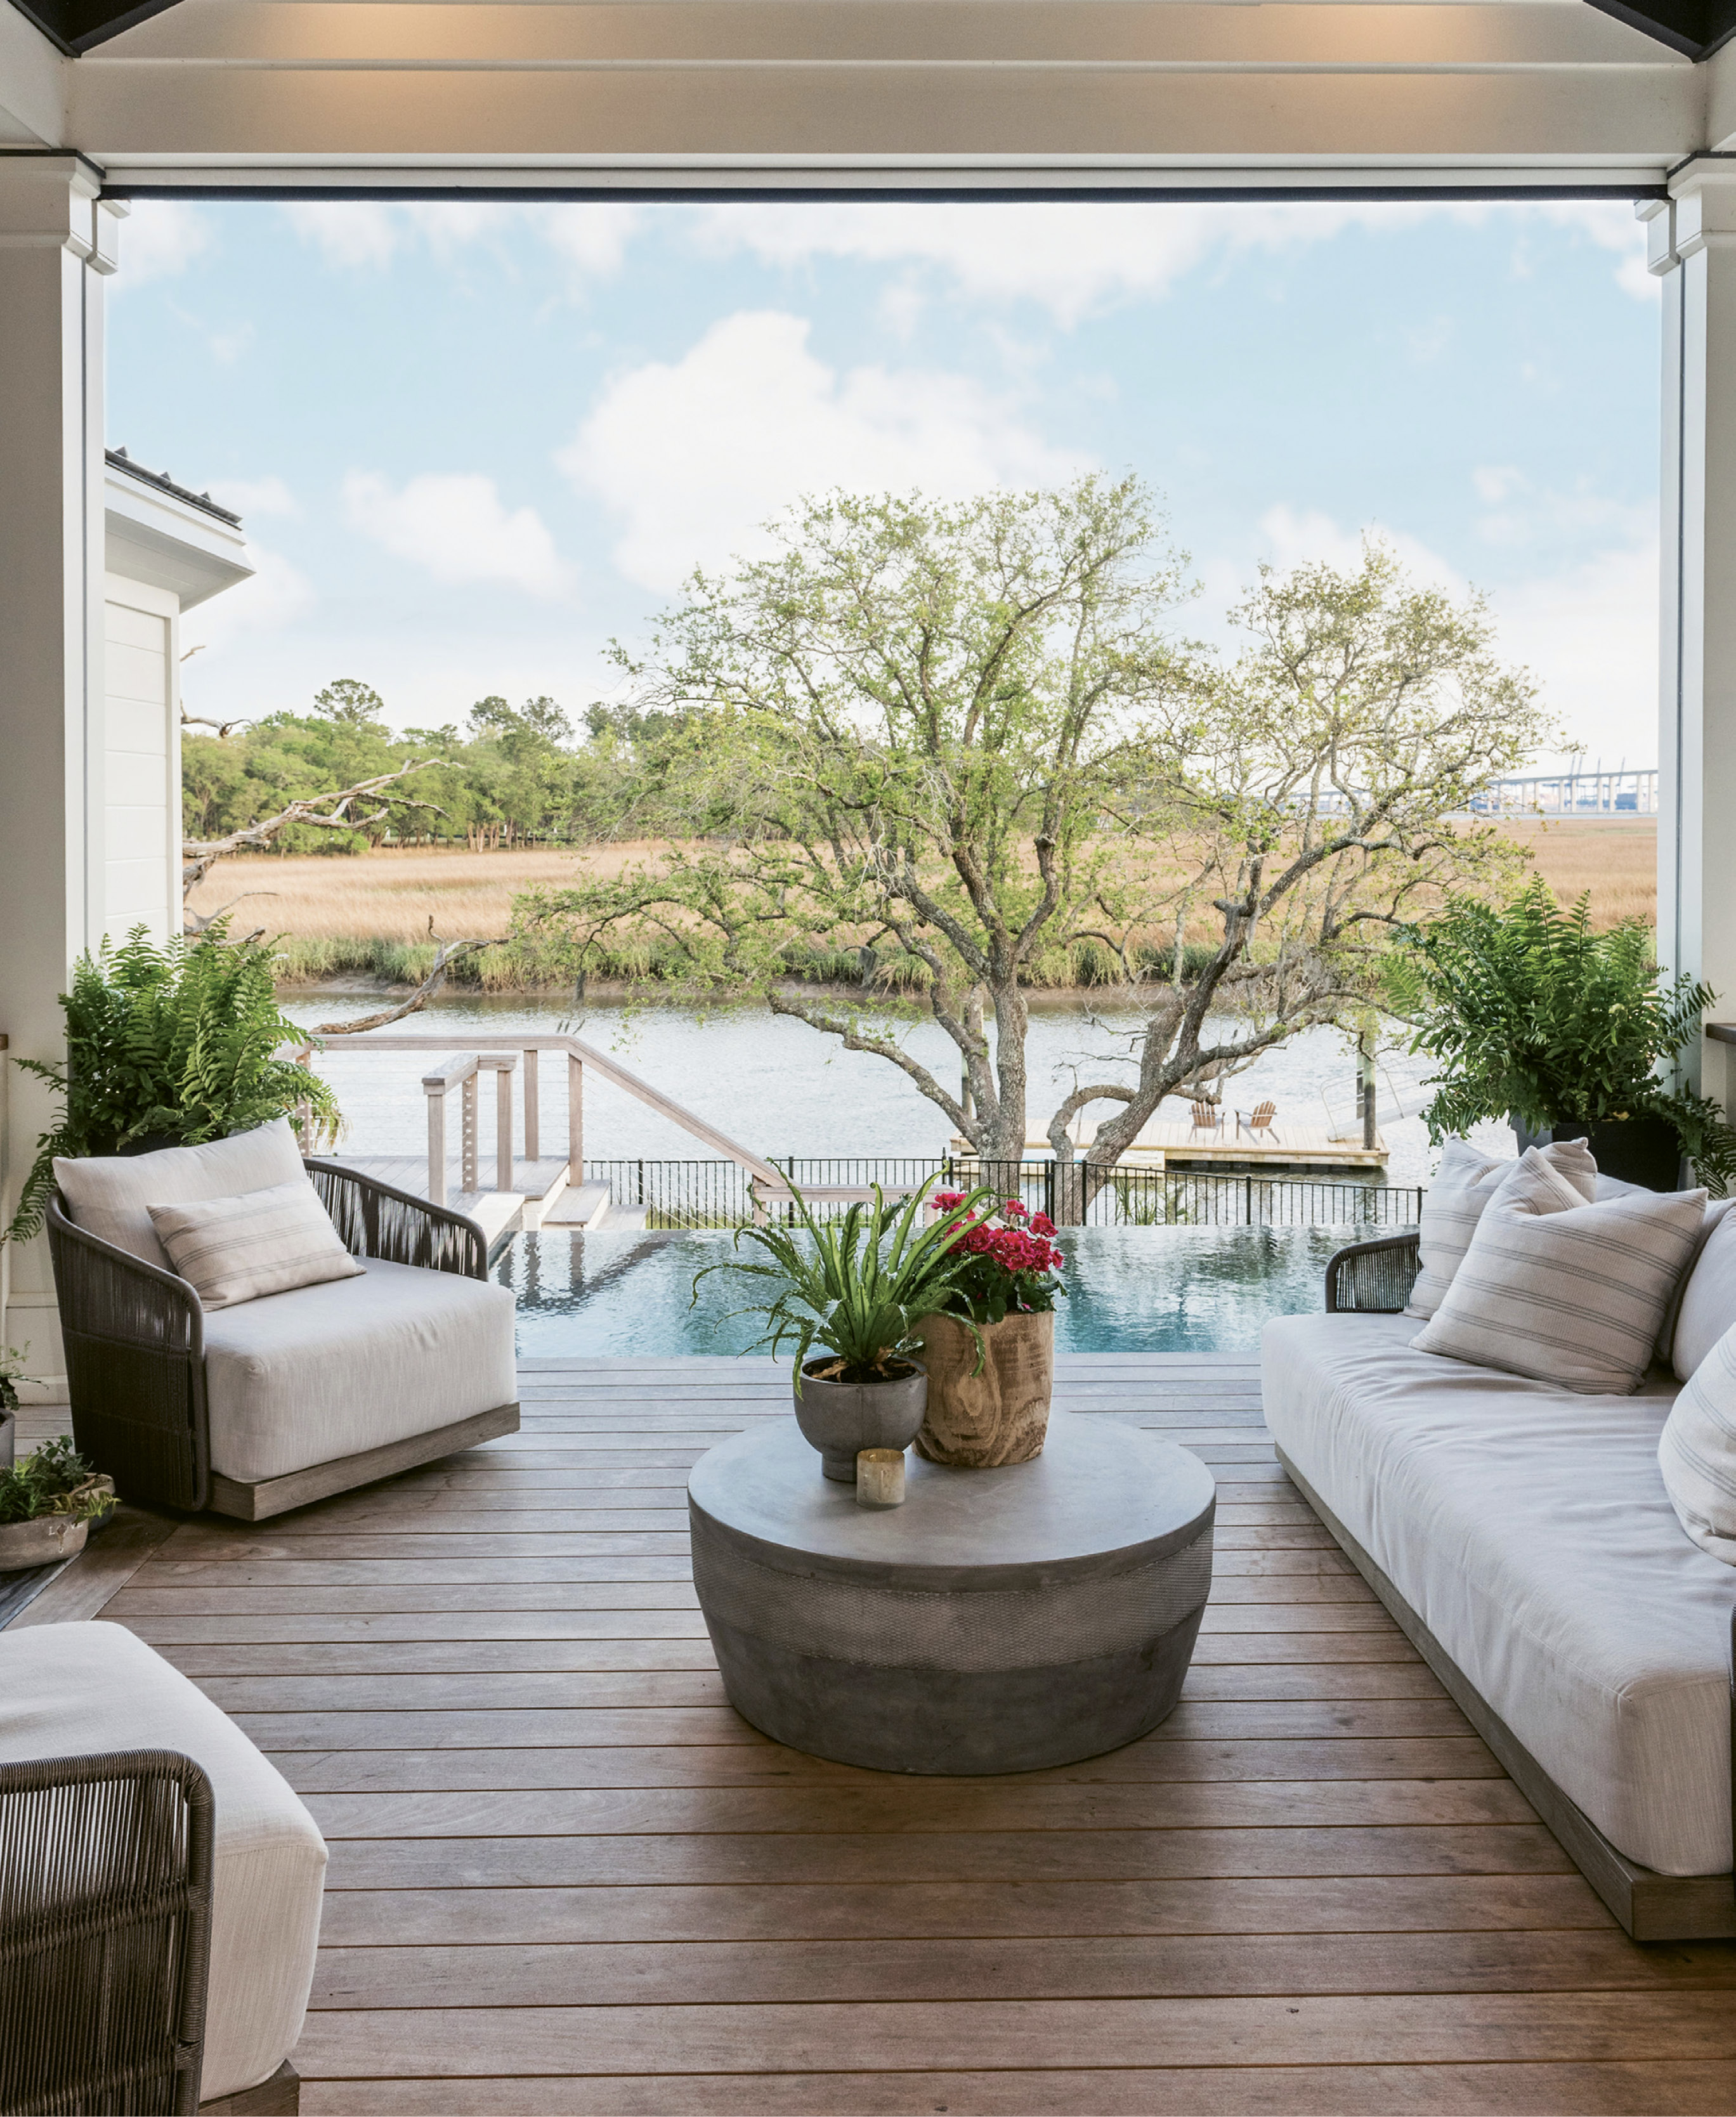 The comfortably appointed covered back porch overlooks the pool and Ralston Creek.